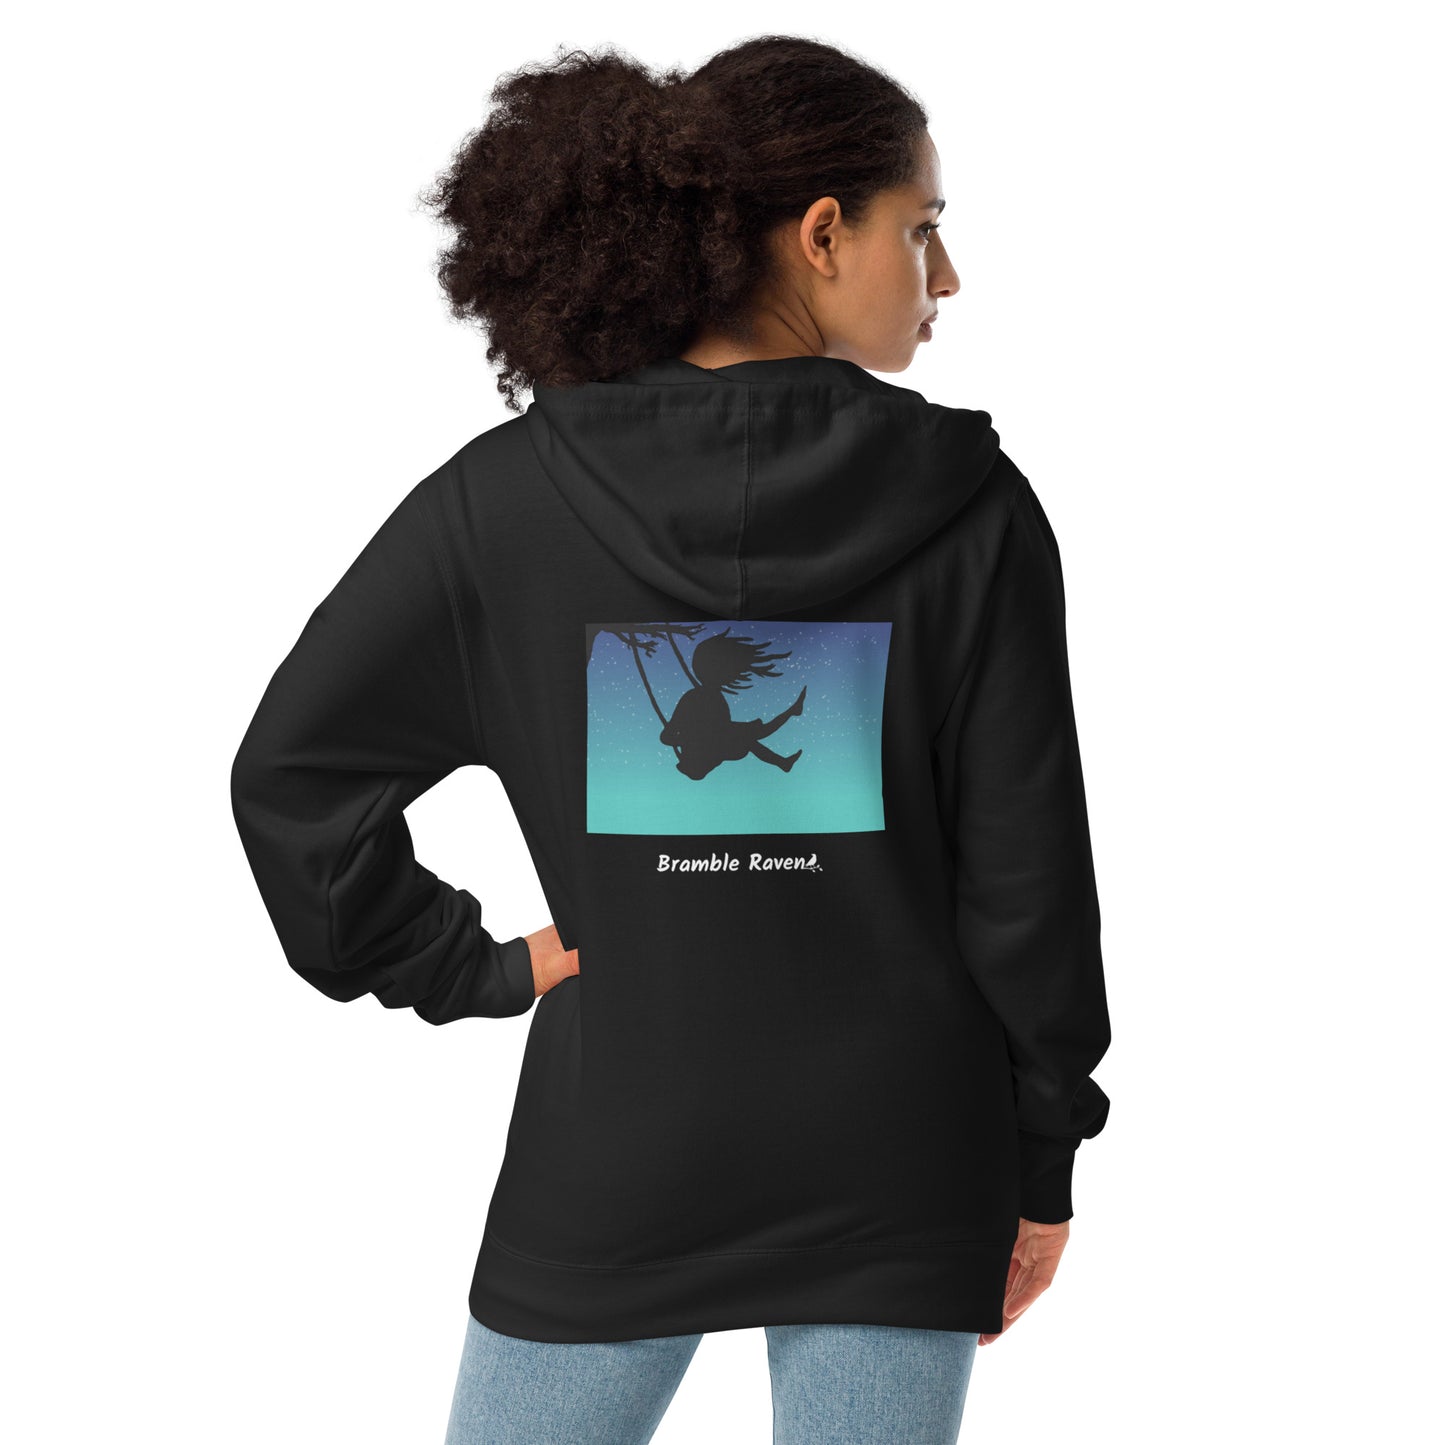 Original Swing Free design of a girl's silhouette in a tree swing against the backdrop of a blue starry sky. Rectangular image on the back of a unisex fleece-lined black colored zip up hoodie. Shown on female model.